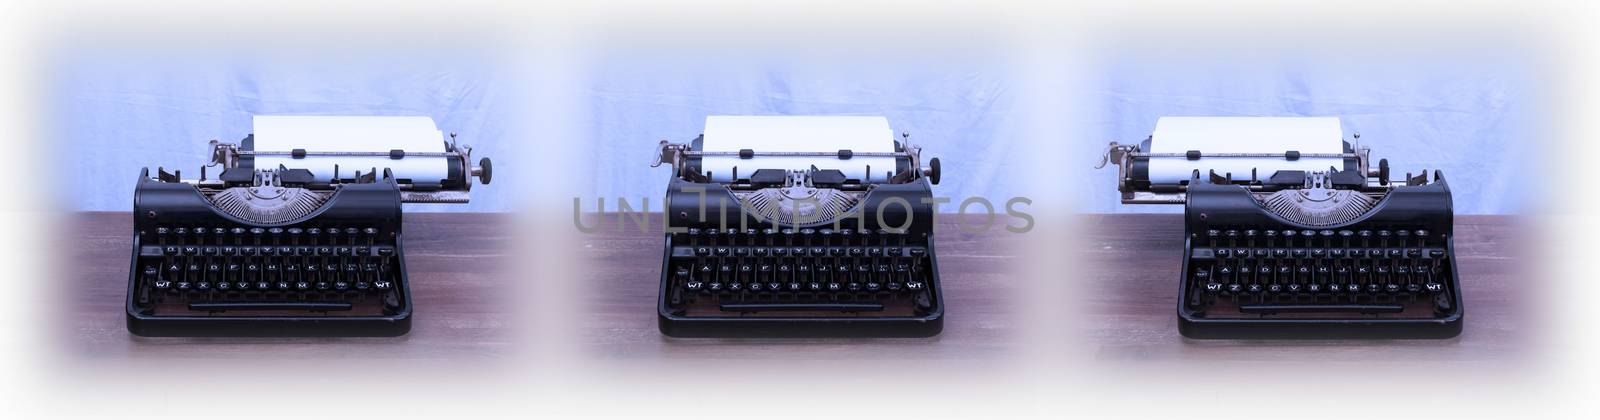 Old typewriter on wooden table by michaklootwijk